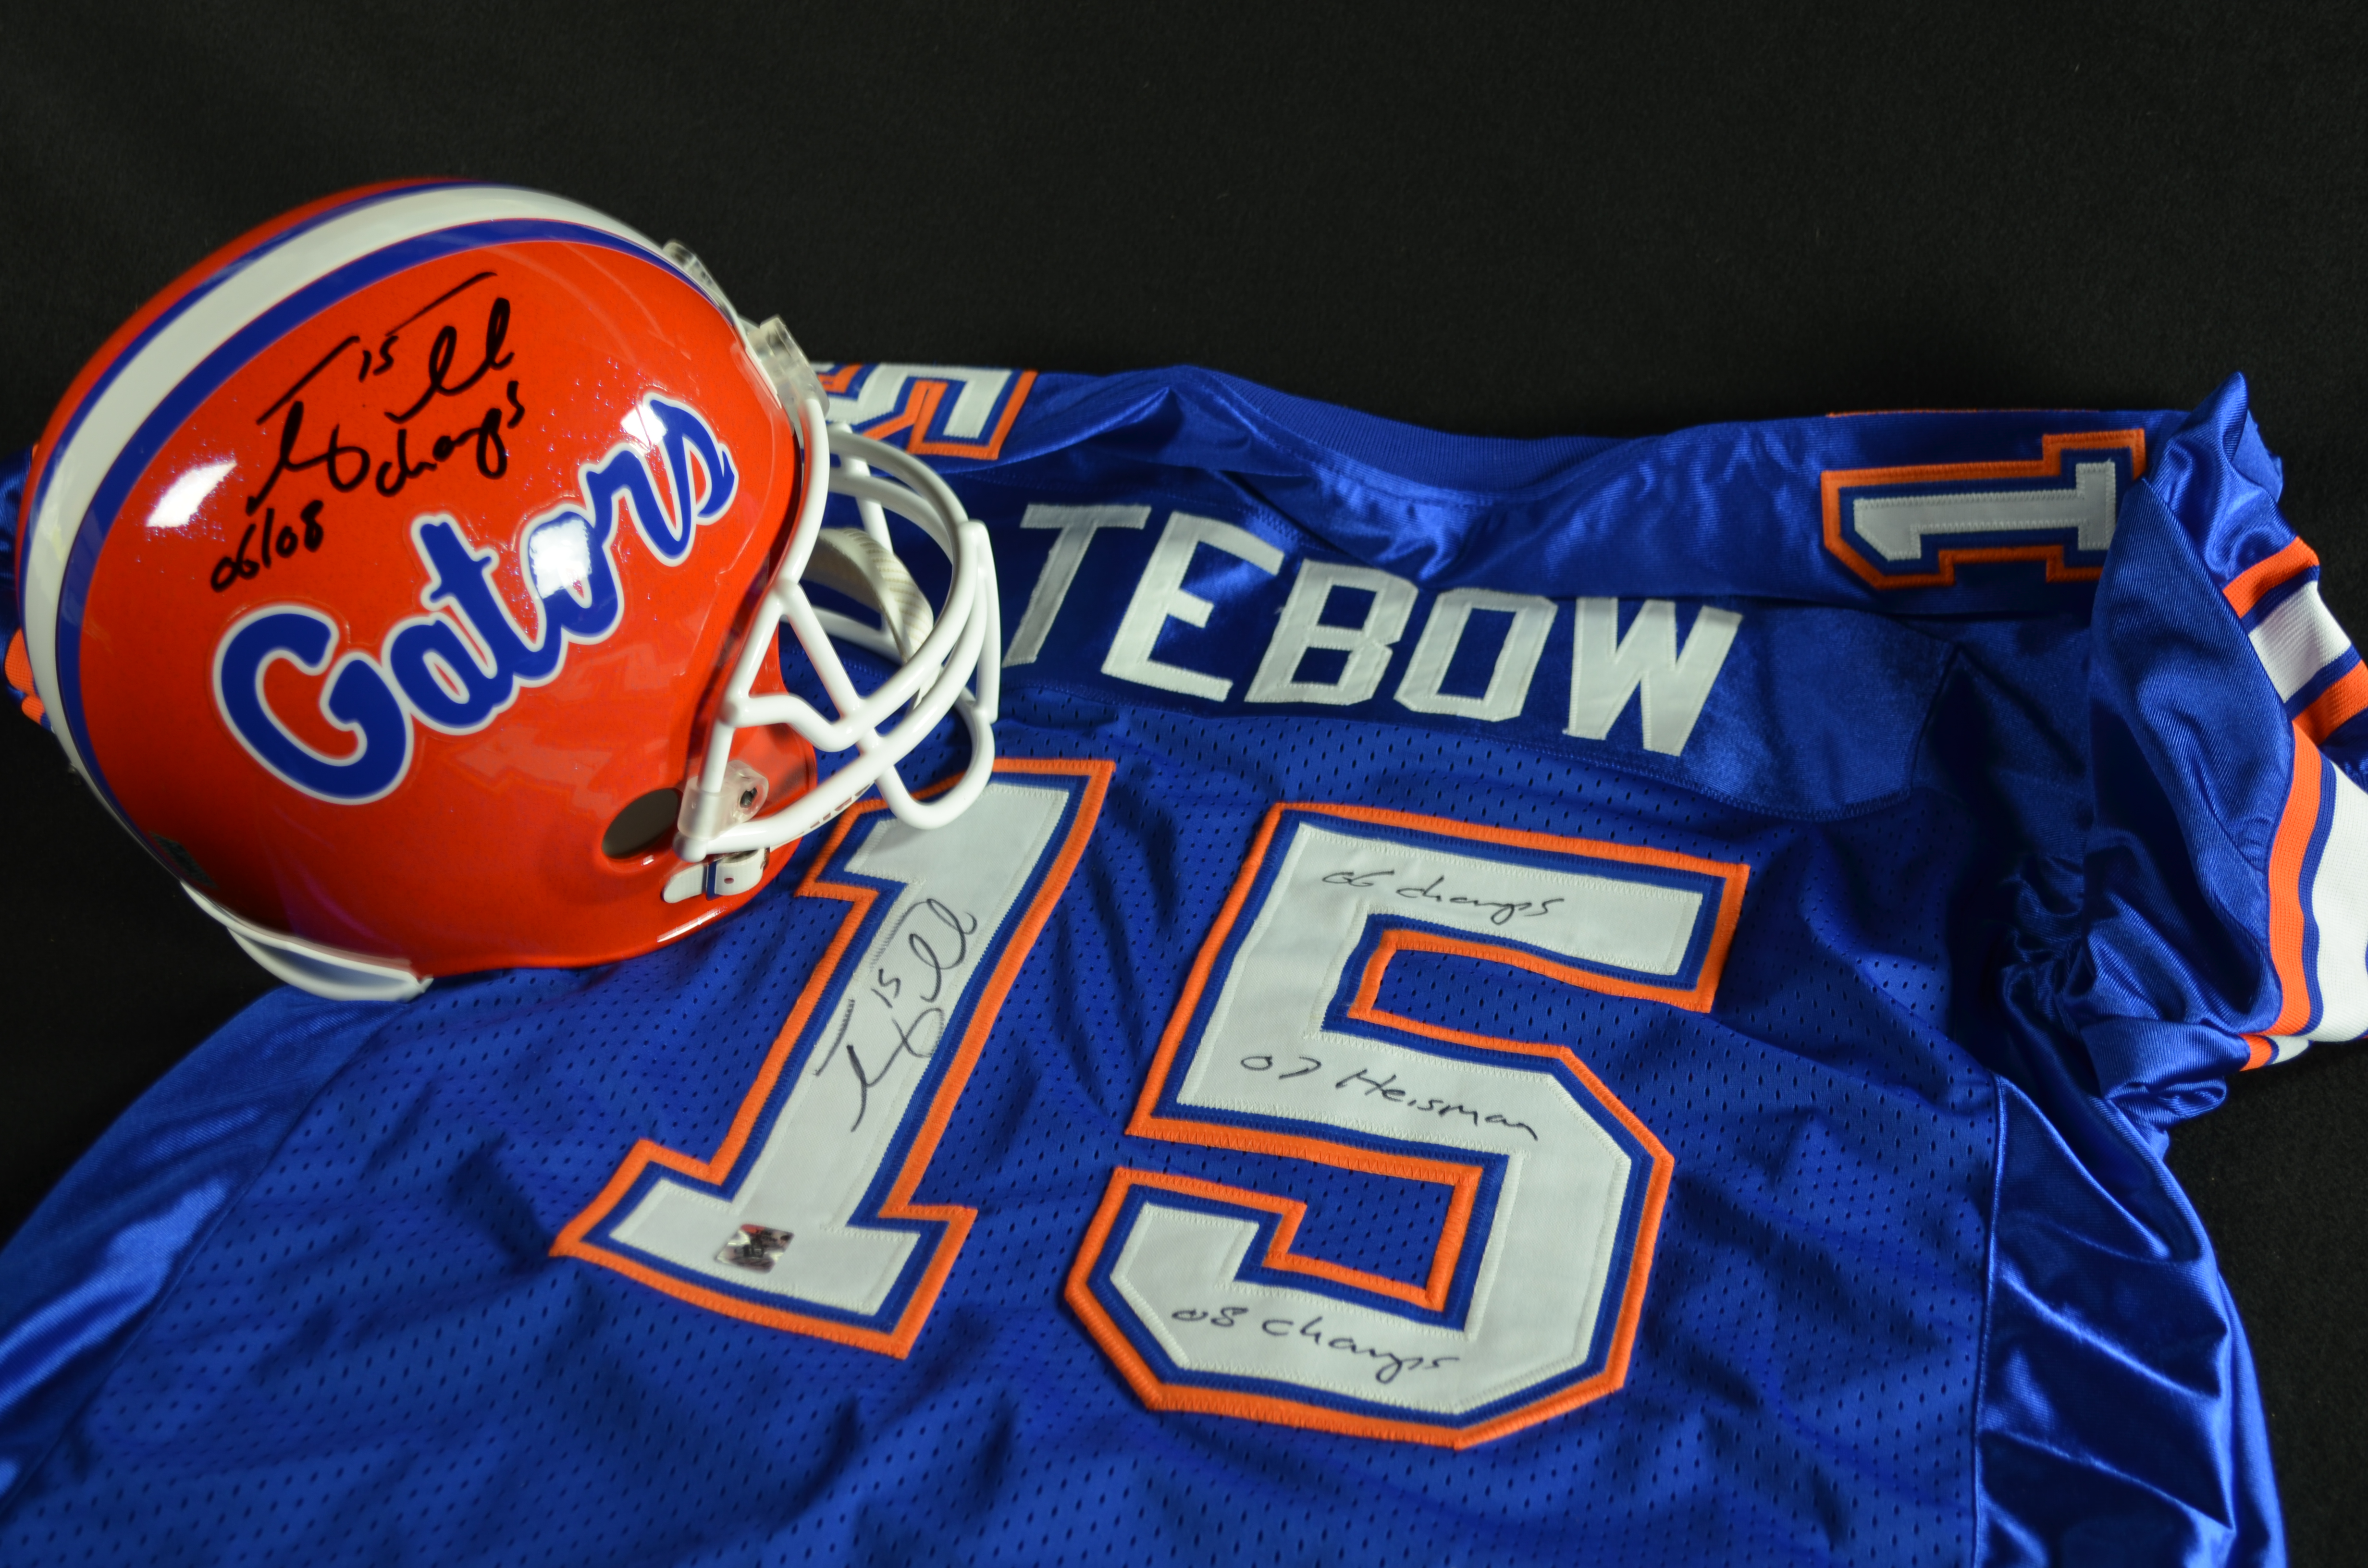 tebow college jersey